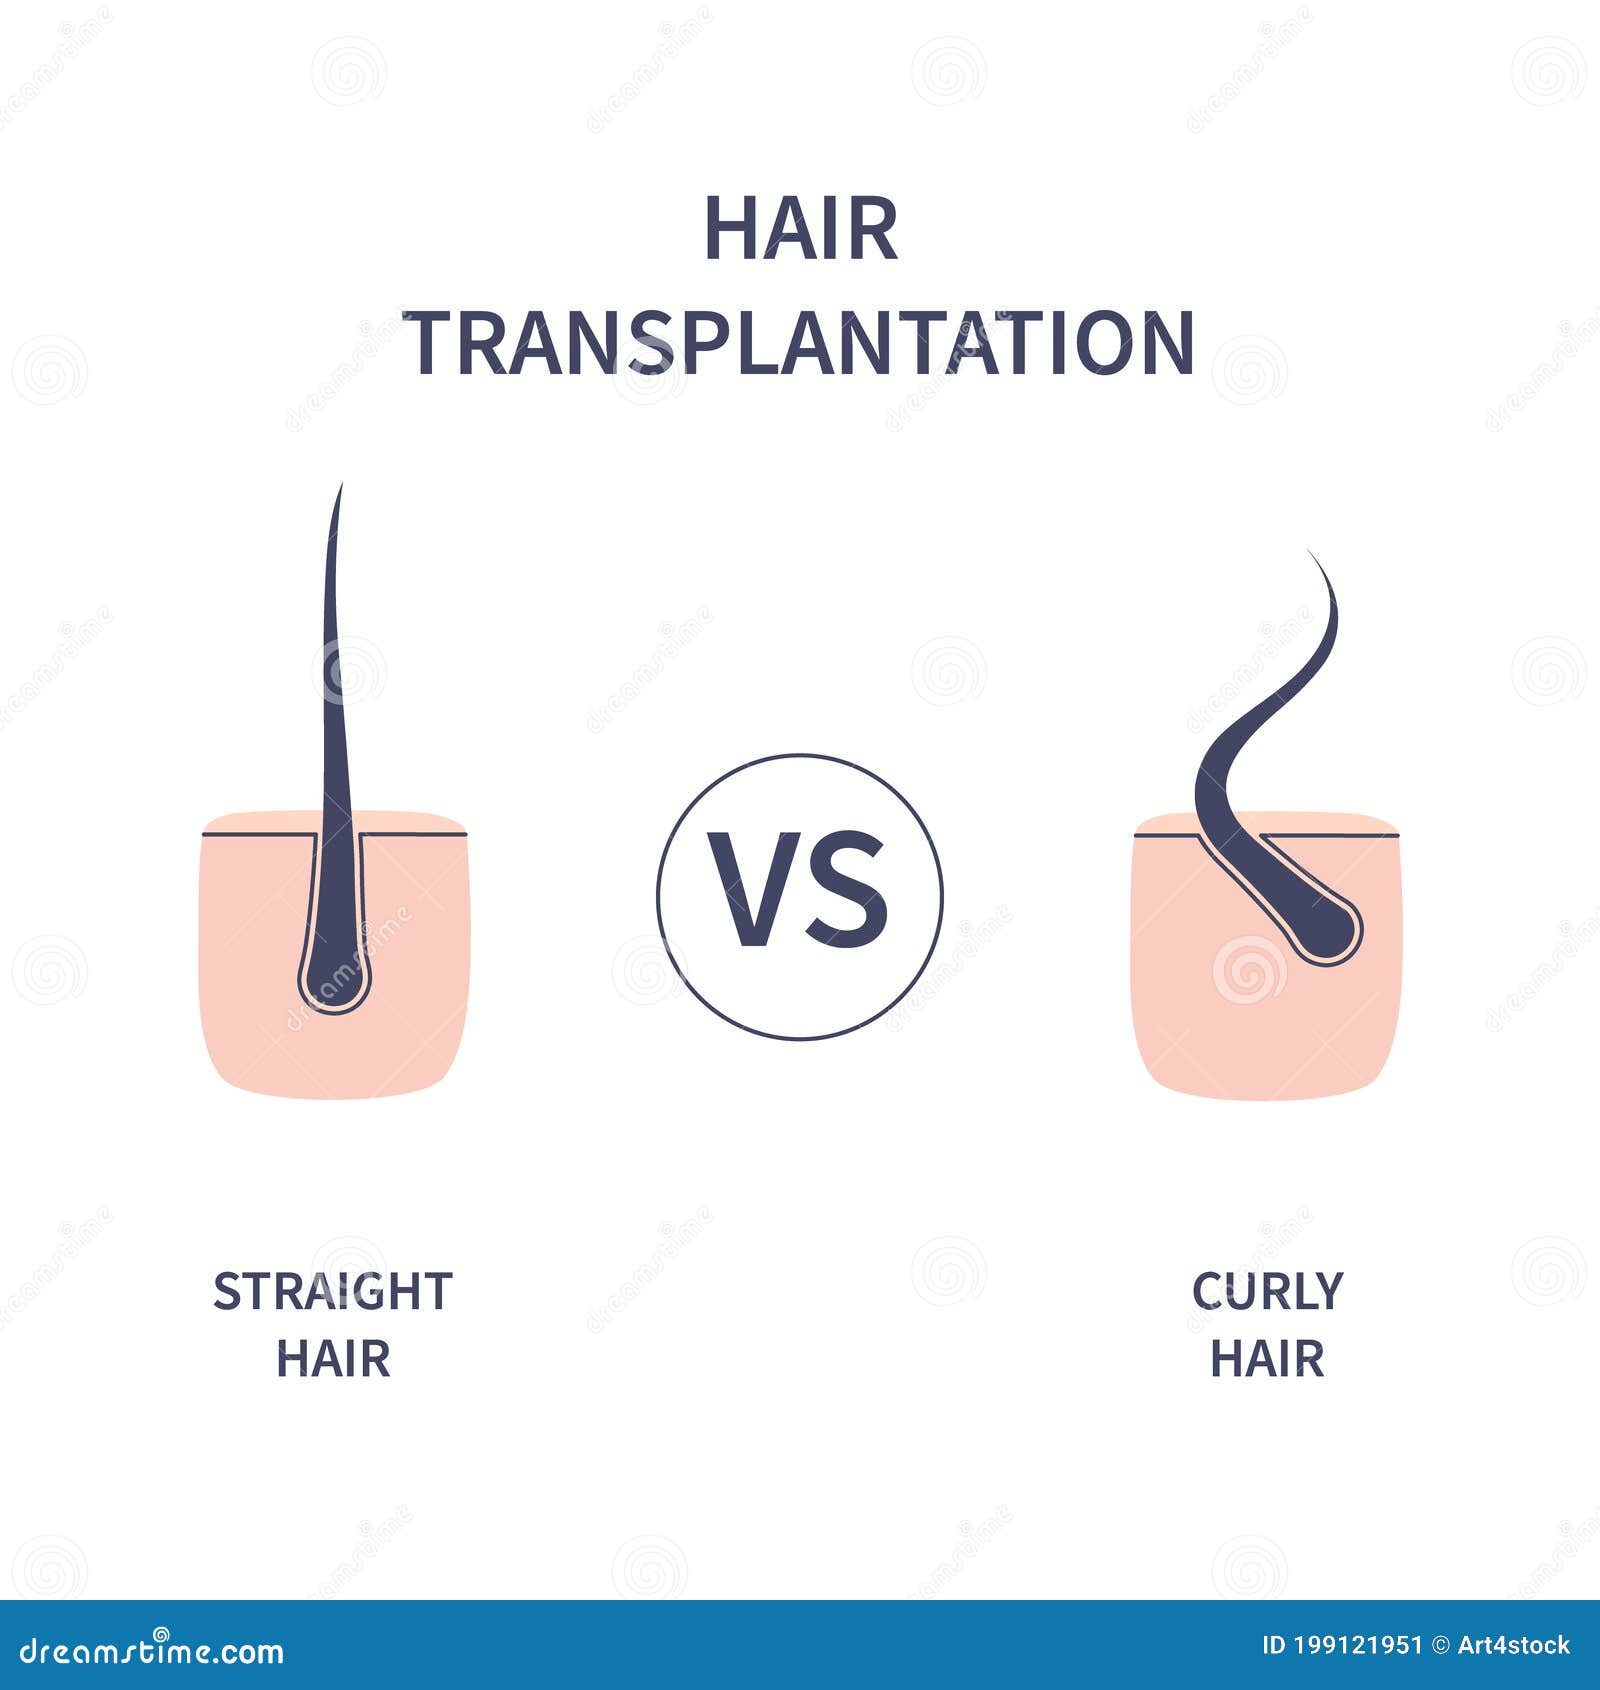 Is It Normal To Experience Hair Shedding After Hair Transplant?